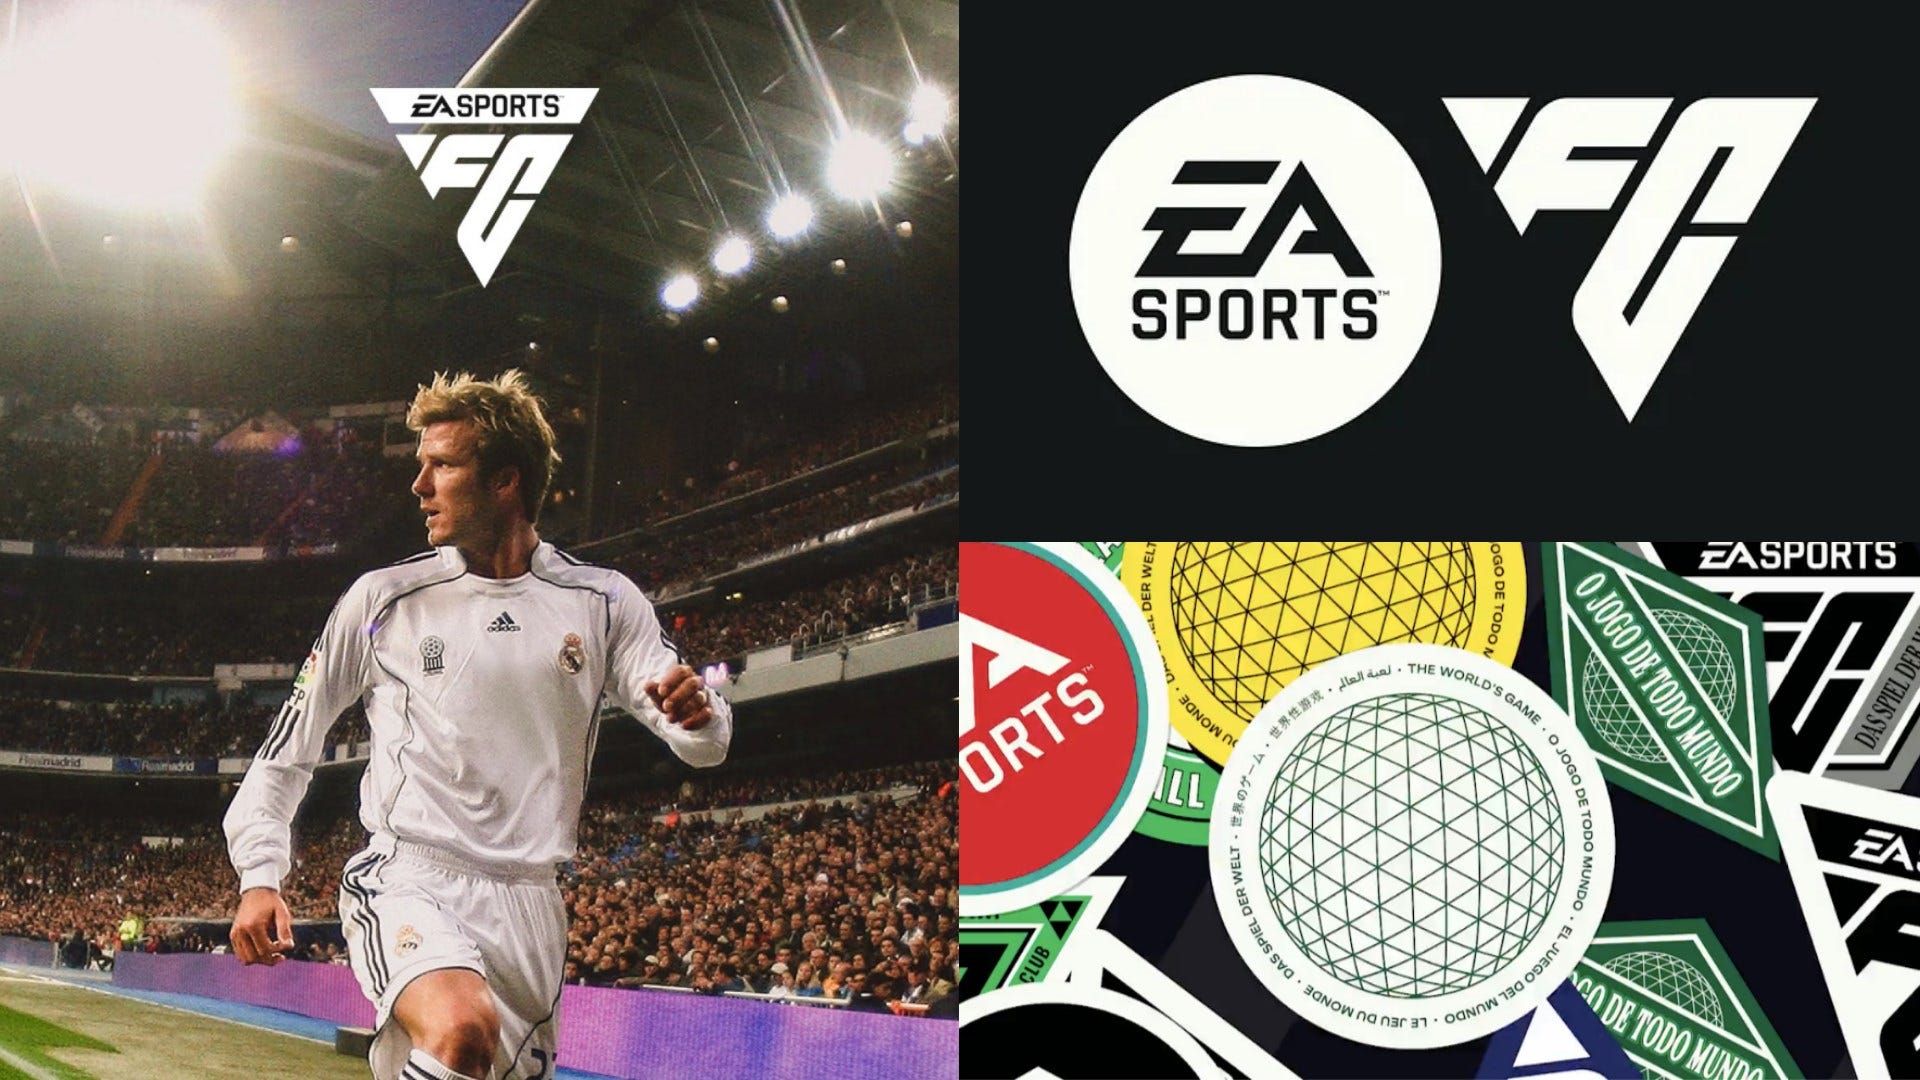 FIFA 19 Info: Everything You Need to Know About EA's Simulator